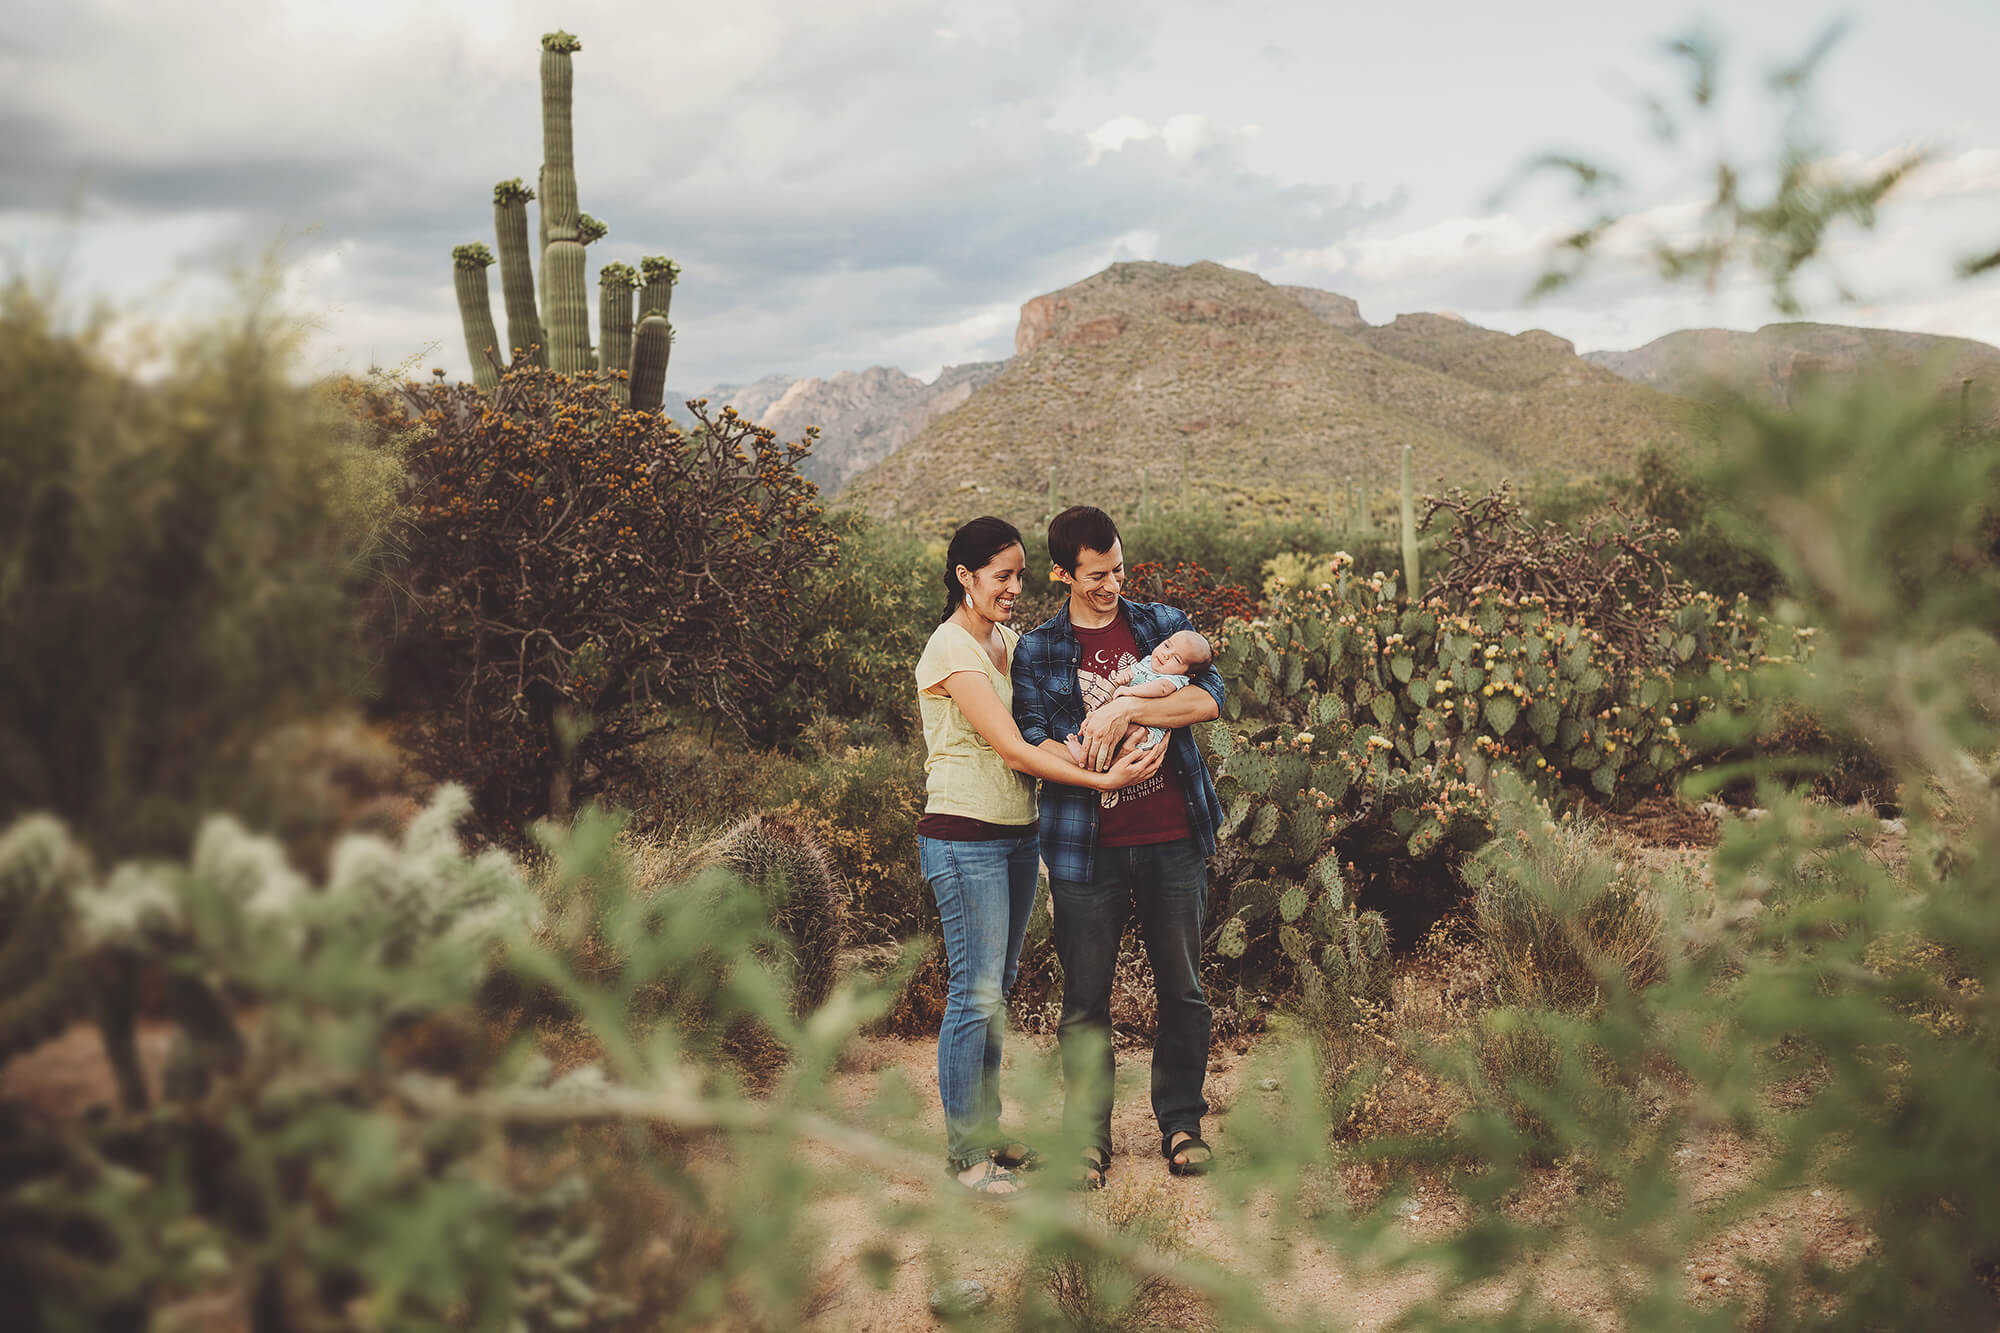 The Sgoutas' family stands amongst the spring cactus blossoms at the base of the Santa Catalina Mountains in Tucson.